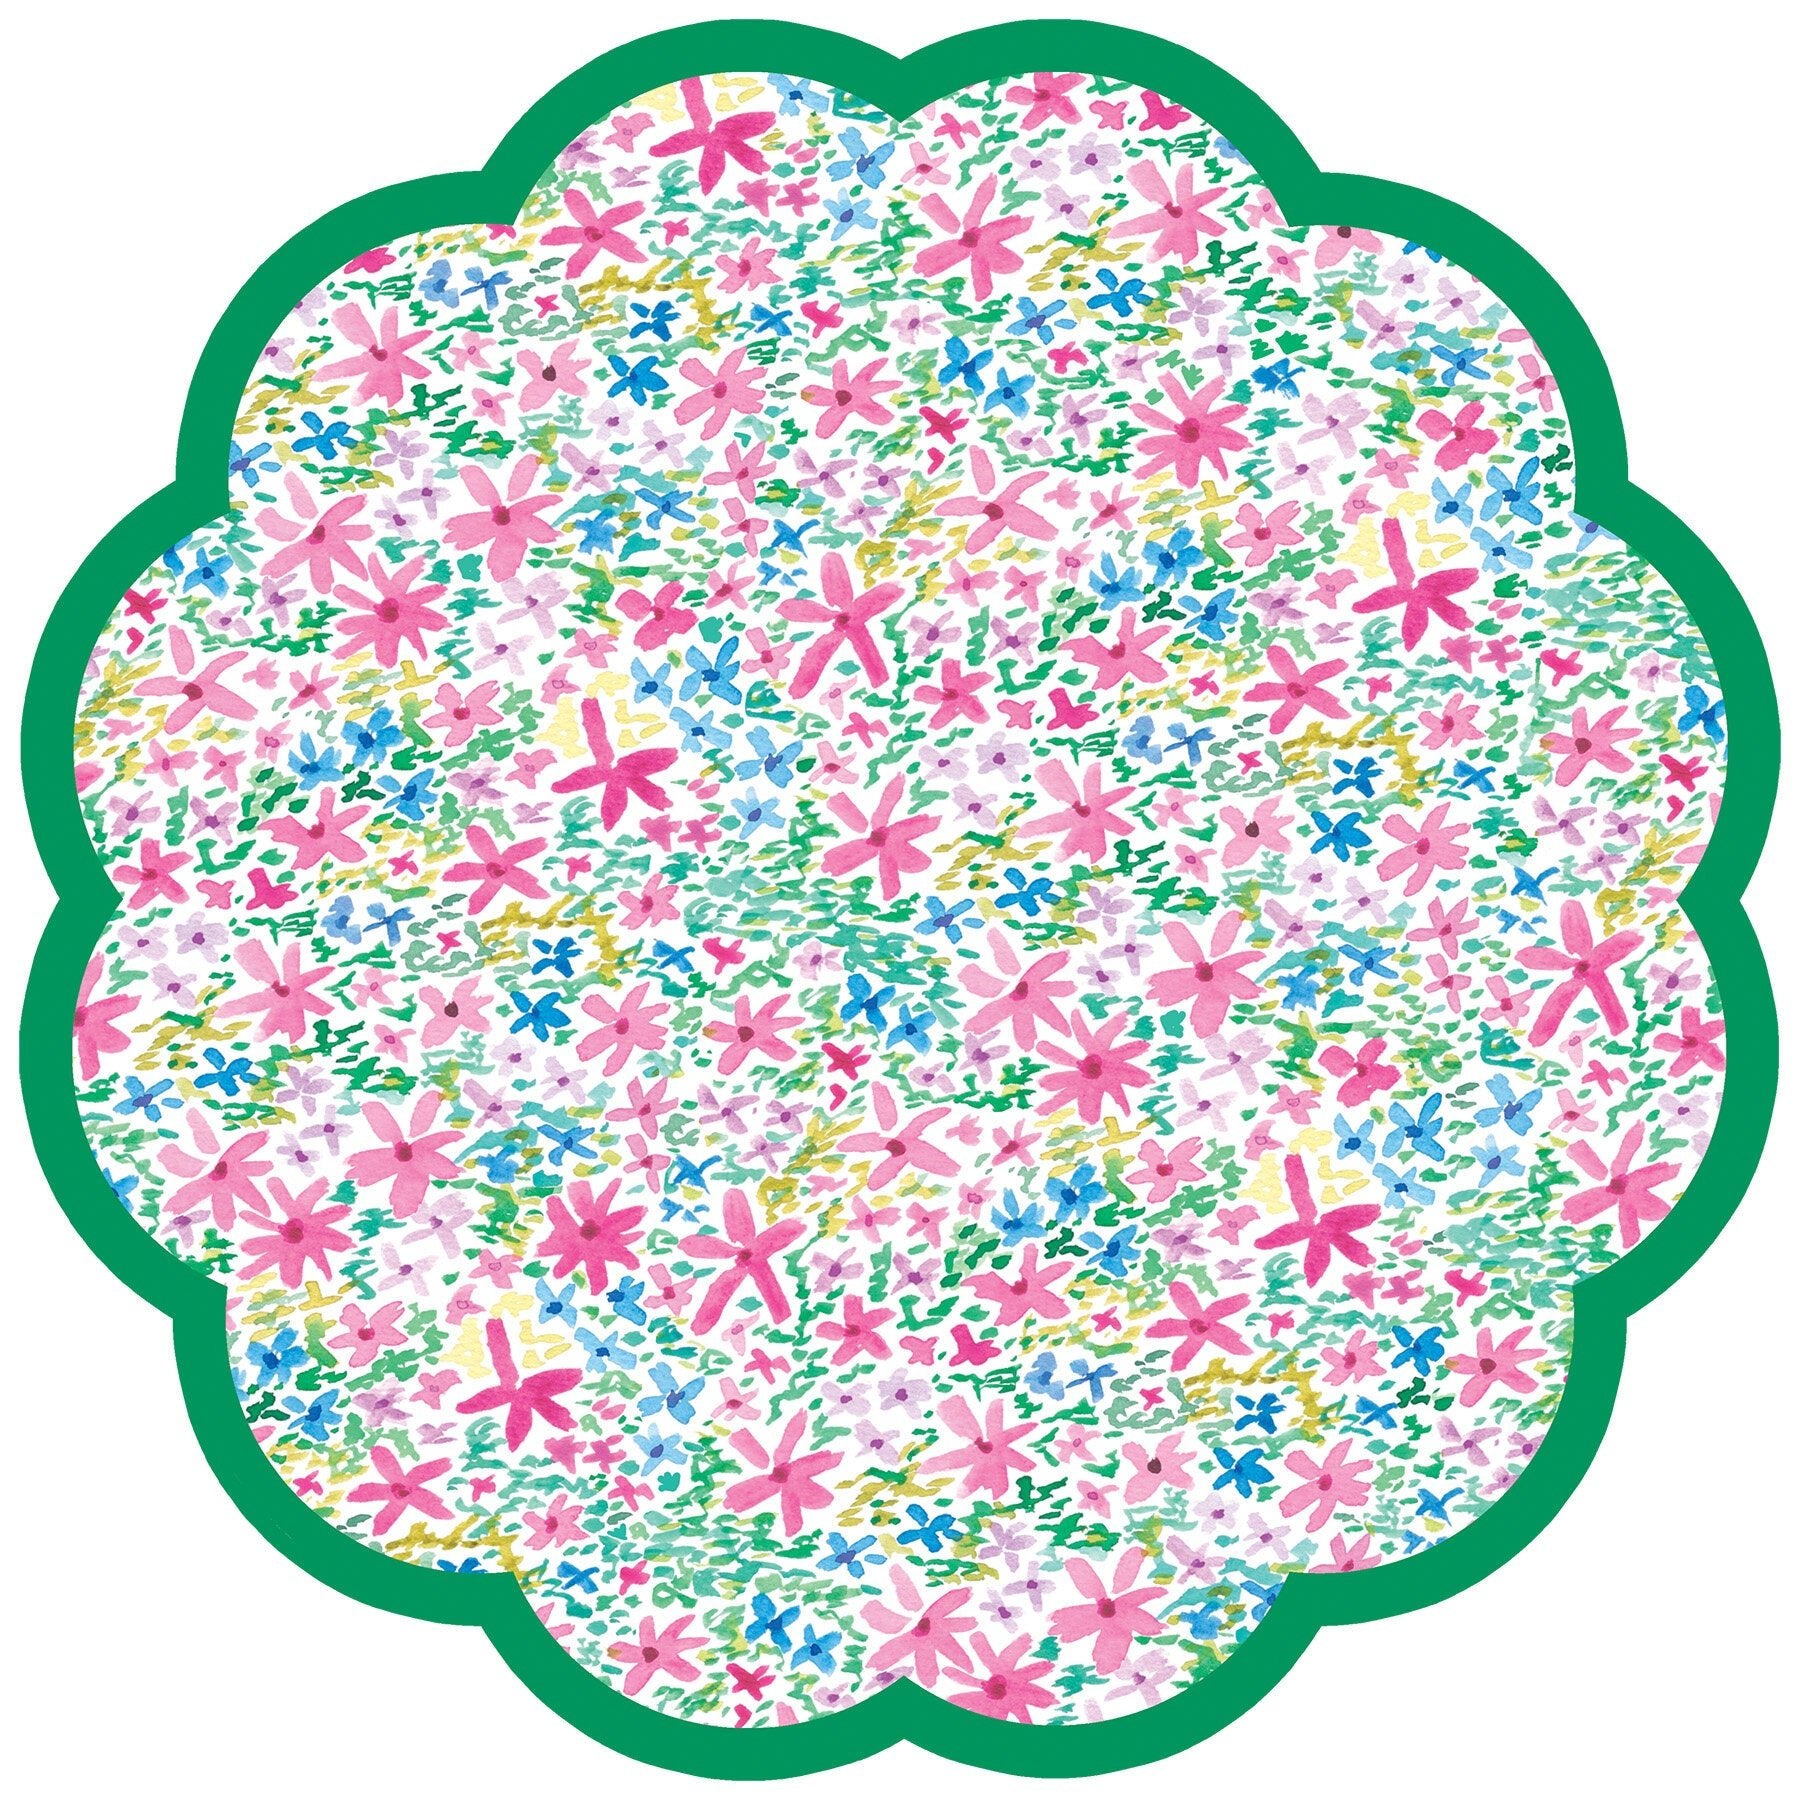 Round scalloped placemat with colorful floral pattern